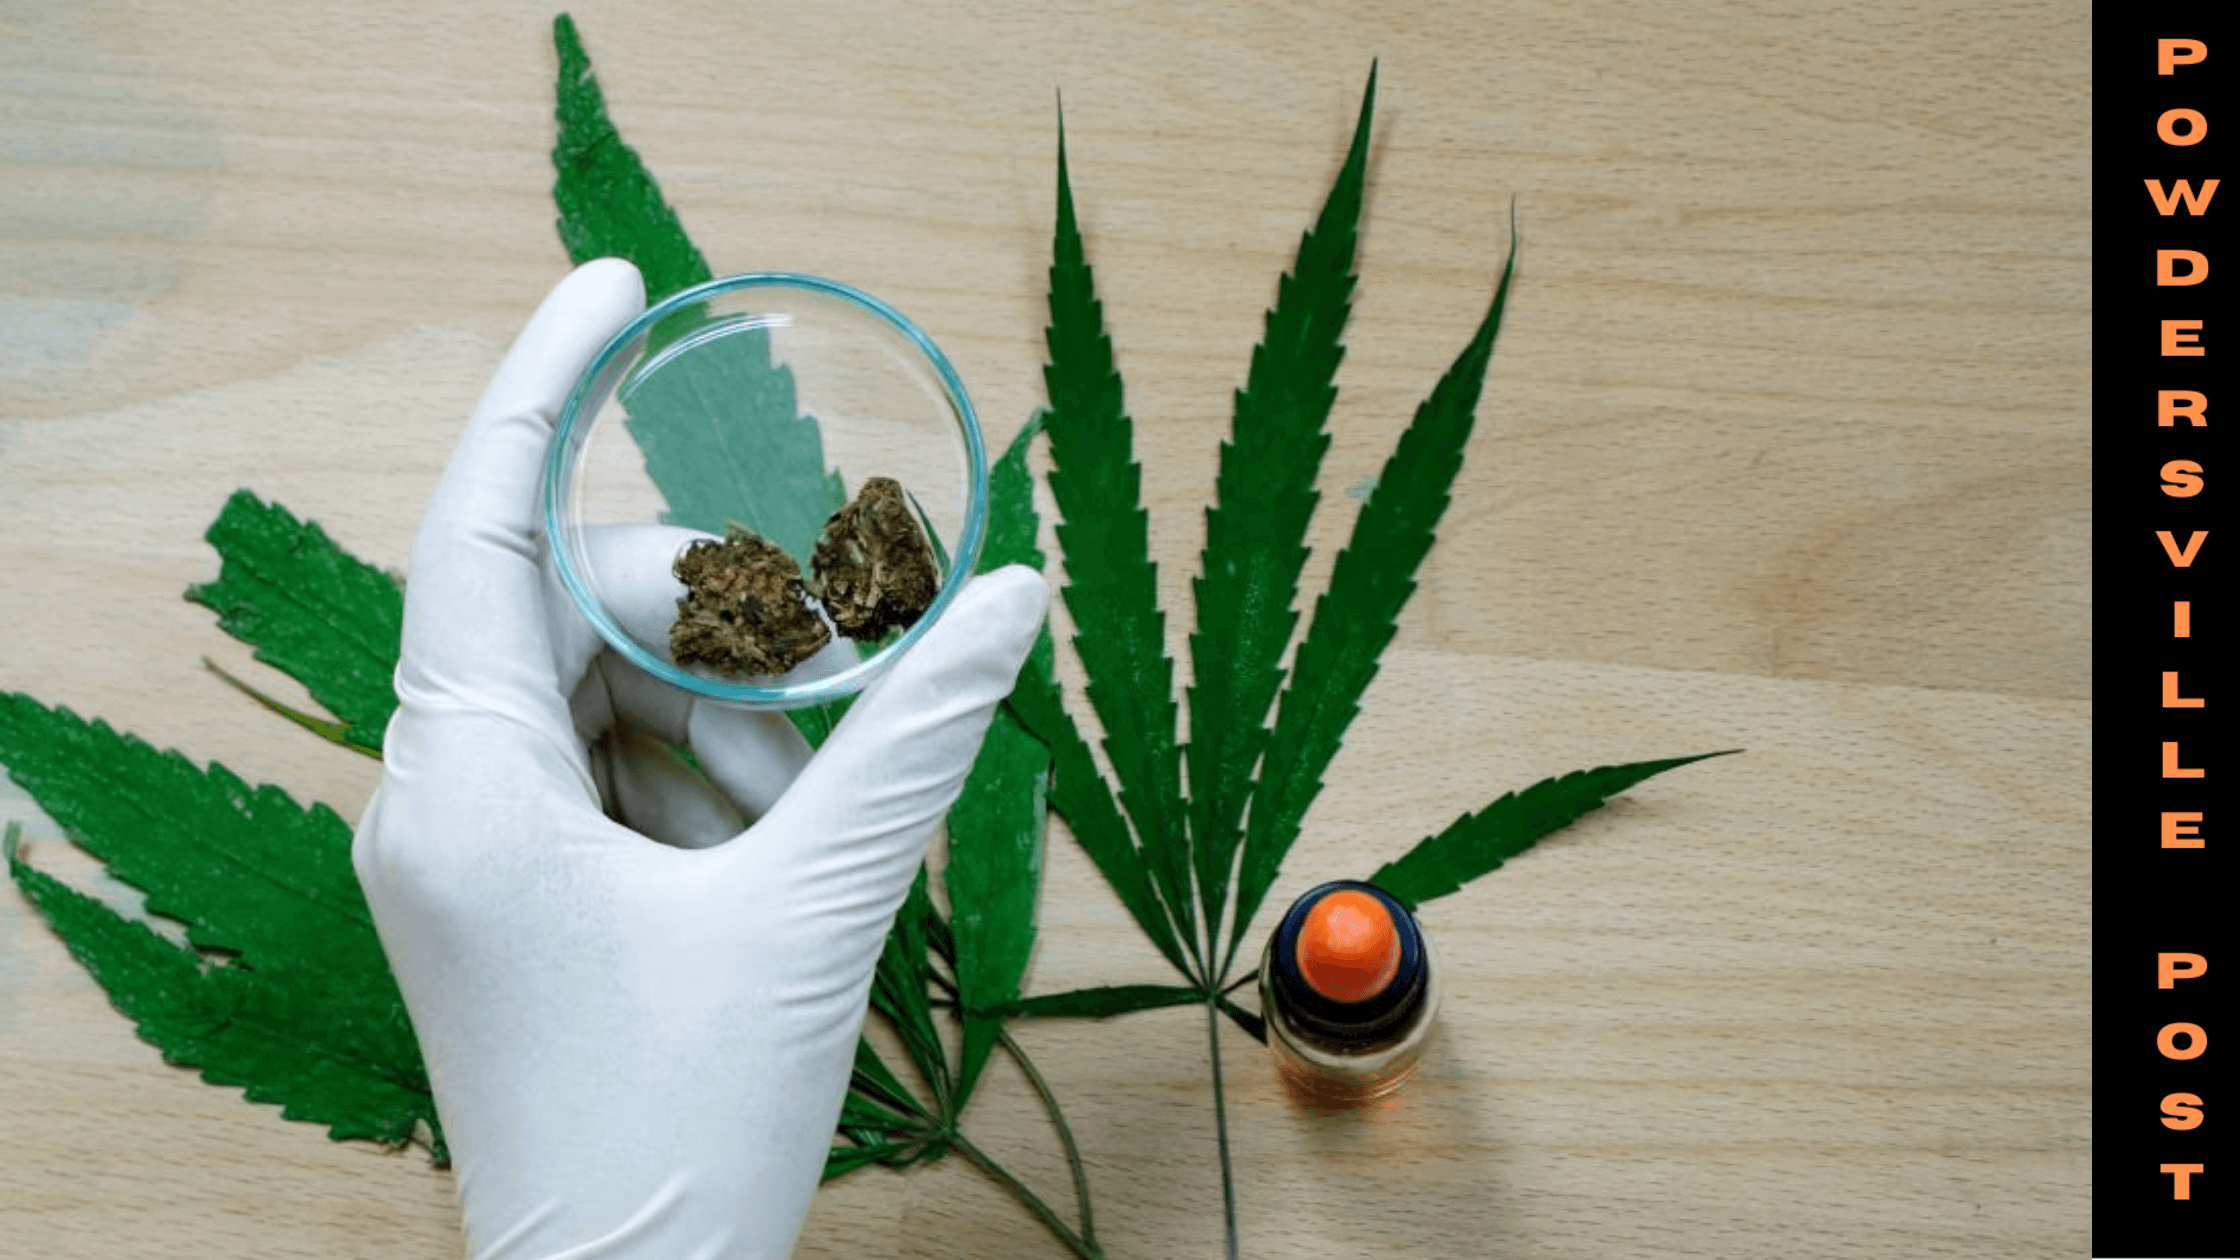 THC Level Raised For Positive Test In Athletes By NCAA